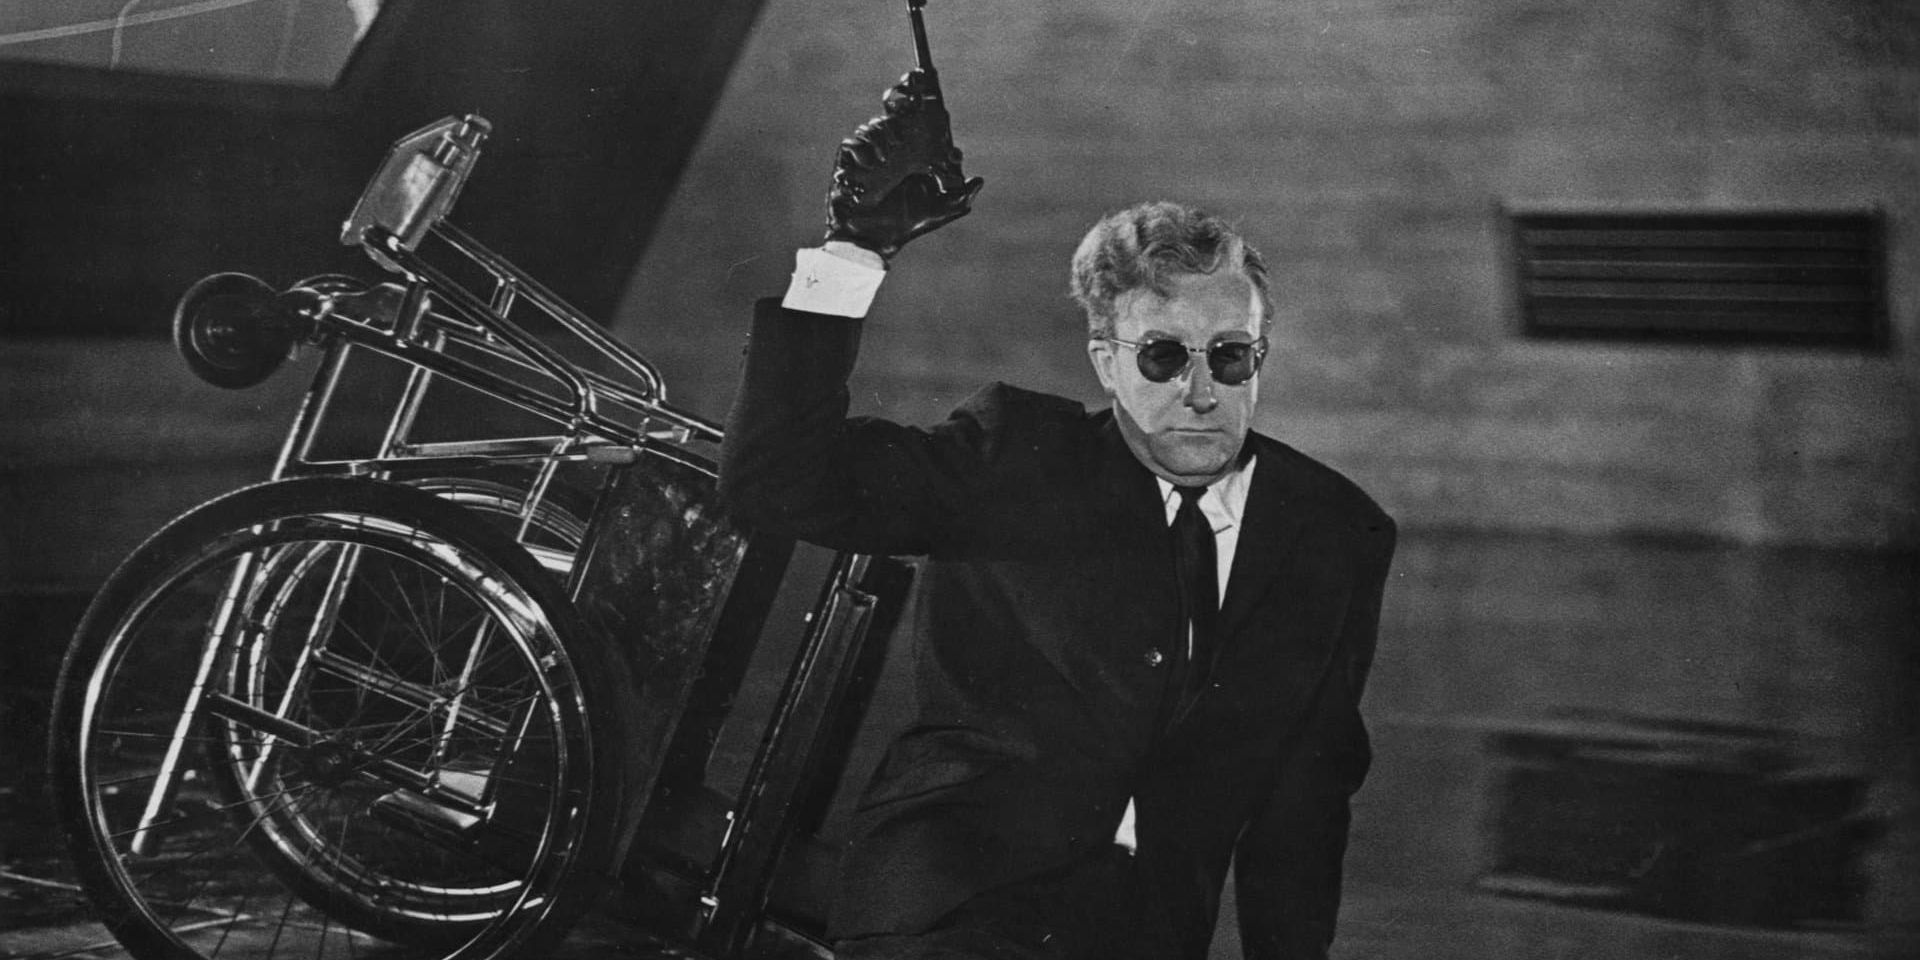 Peter Sellers as Dr Strangelove holding a cane up while sitting on the floor in Dr Strangelove